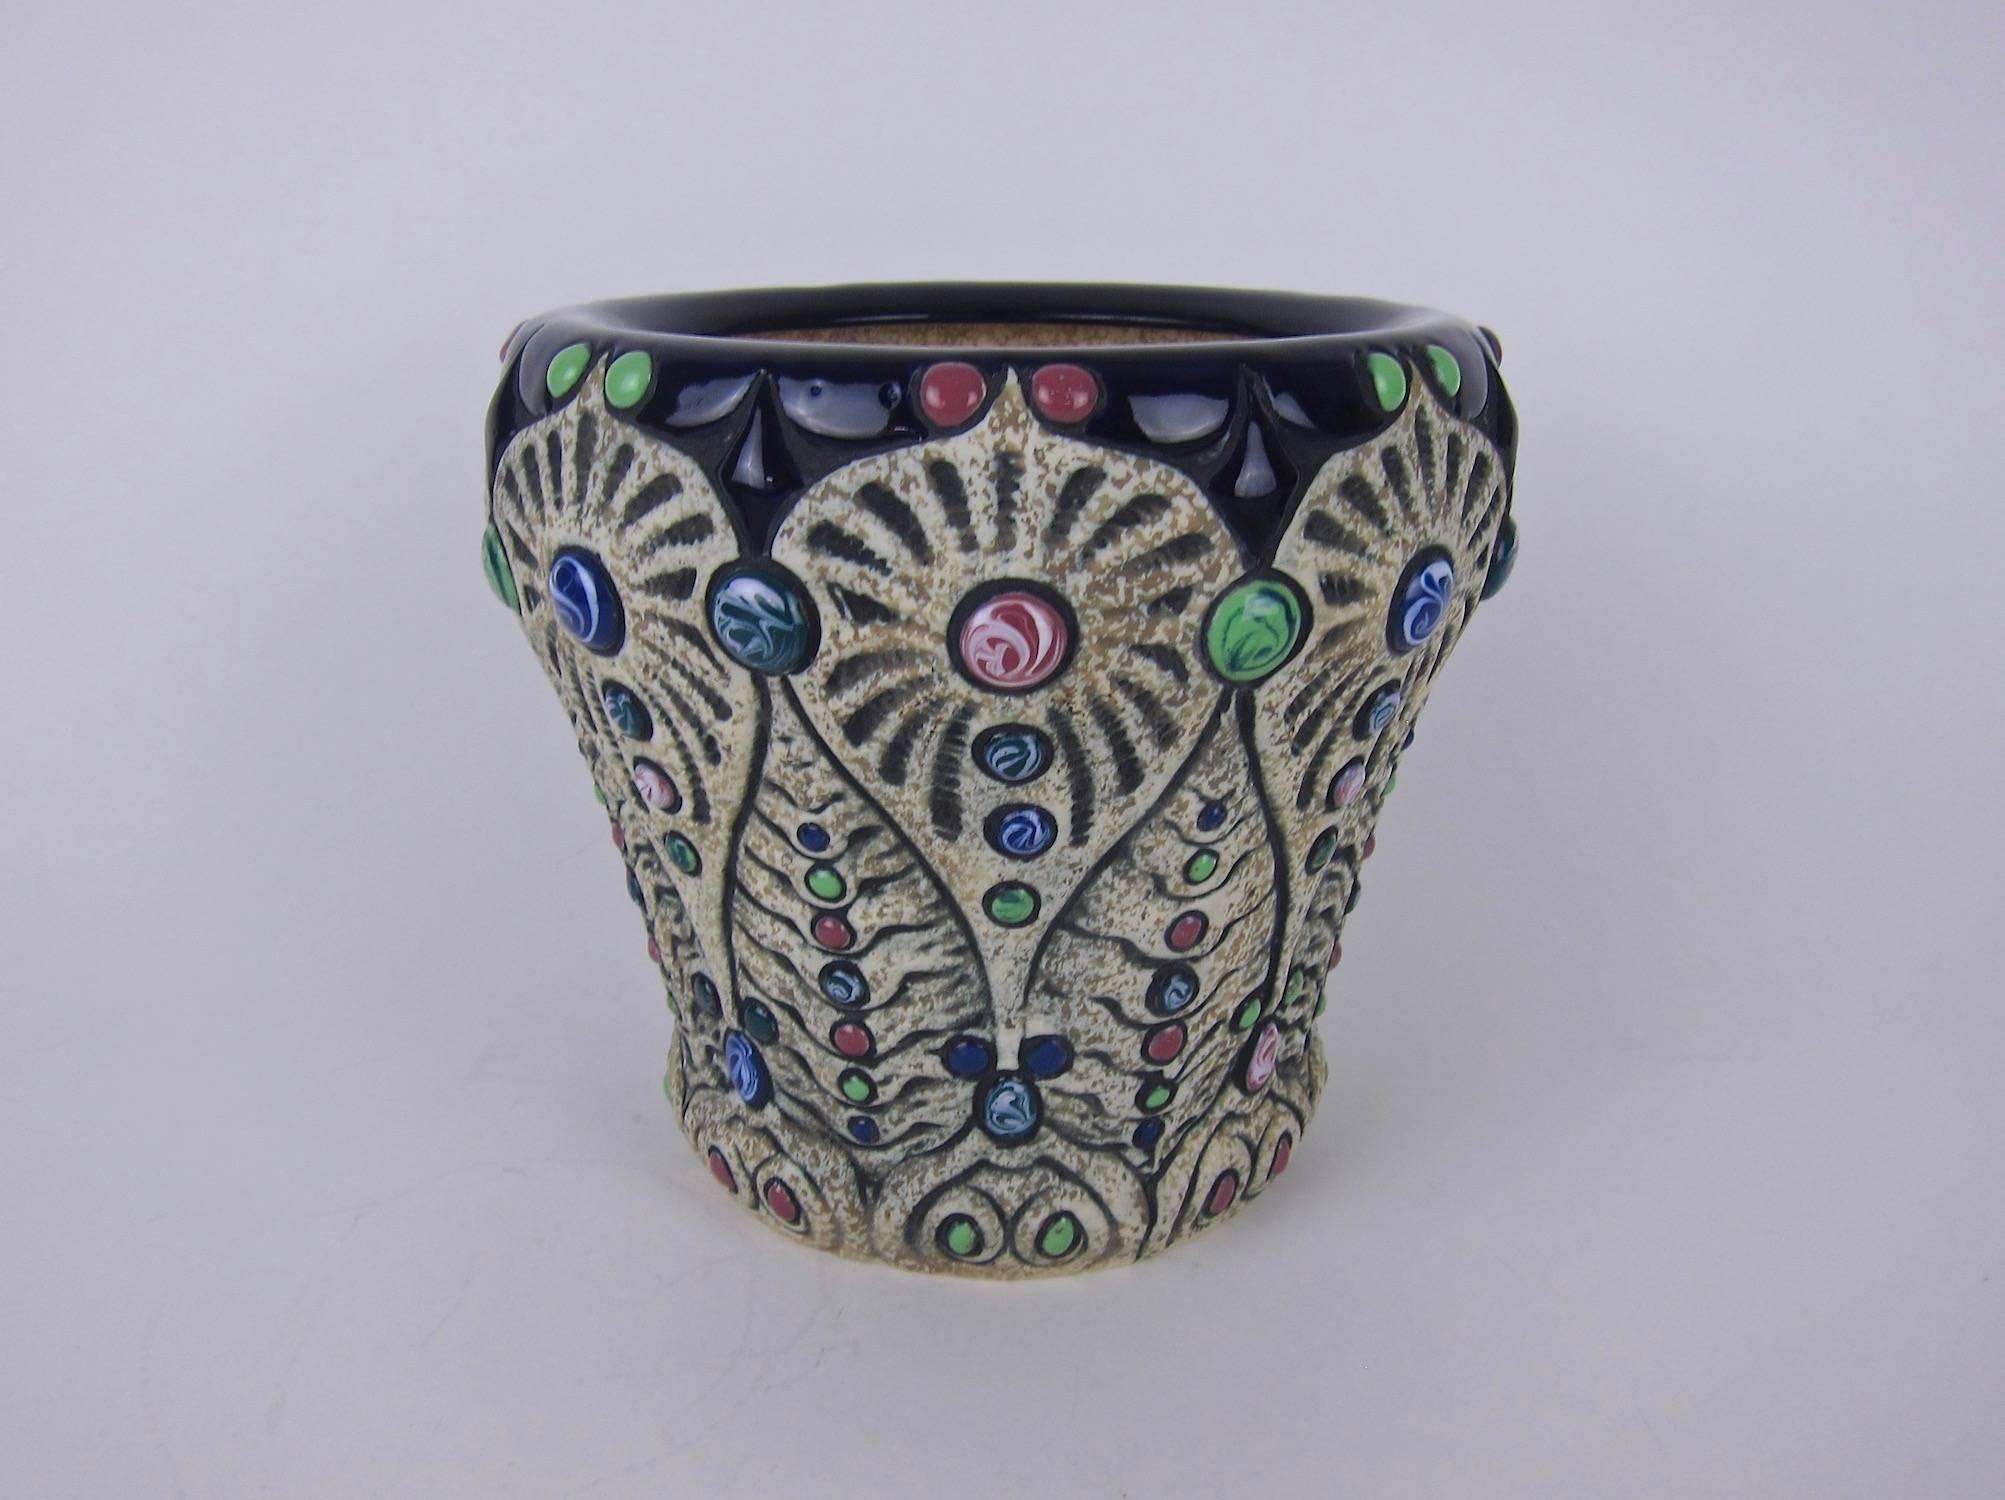 A vintage Amphora pottery jeweled cachepot or jardinière—that can easily be a large vase—made between 1918 and 1939. The Art Nouveau vessel has a wide rim glazed in glossy dark blue above a matte body featuring stylized, hand-carved decoration